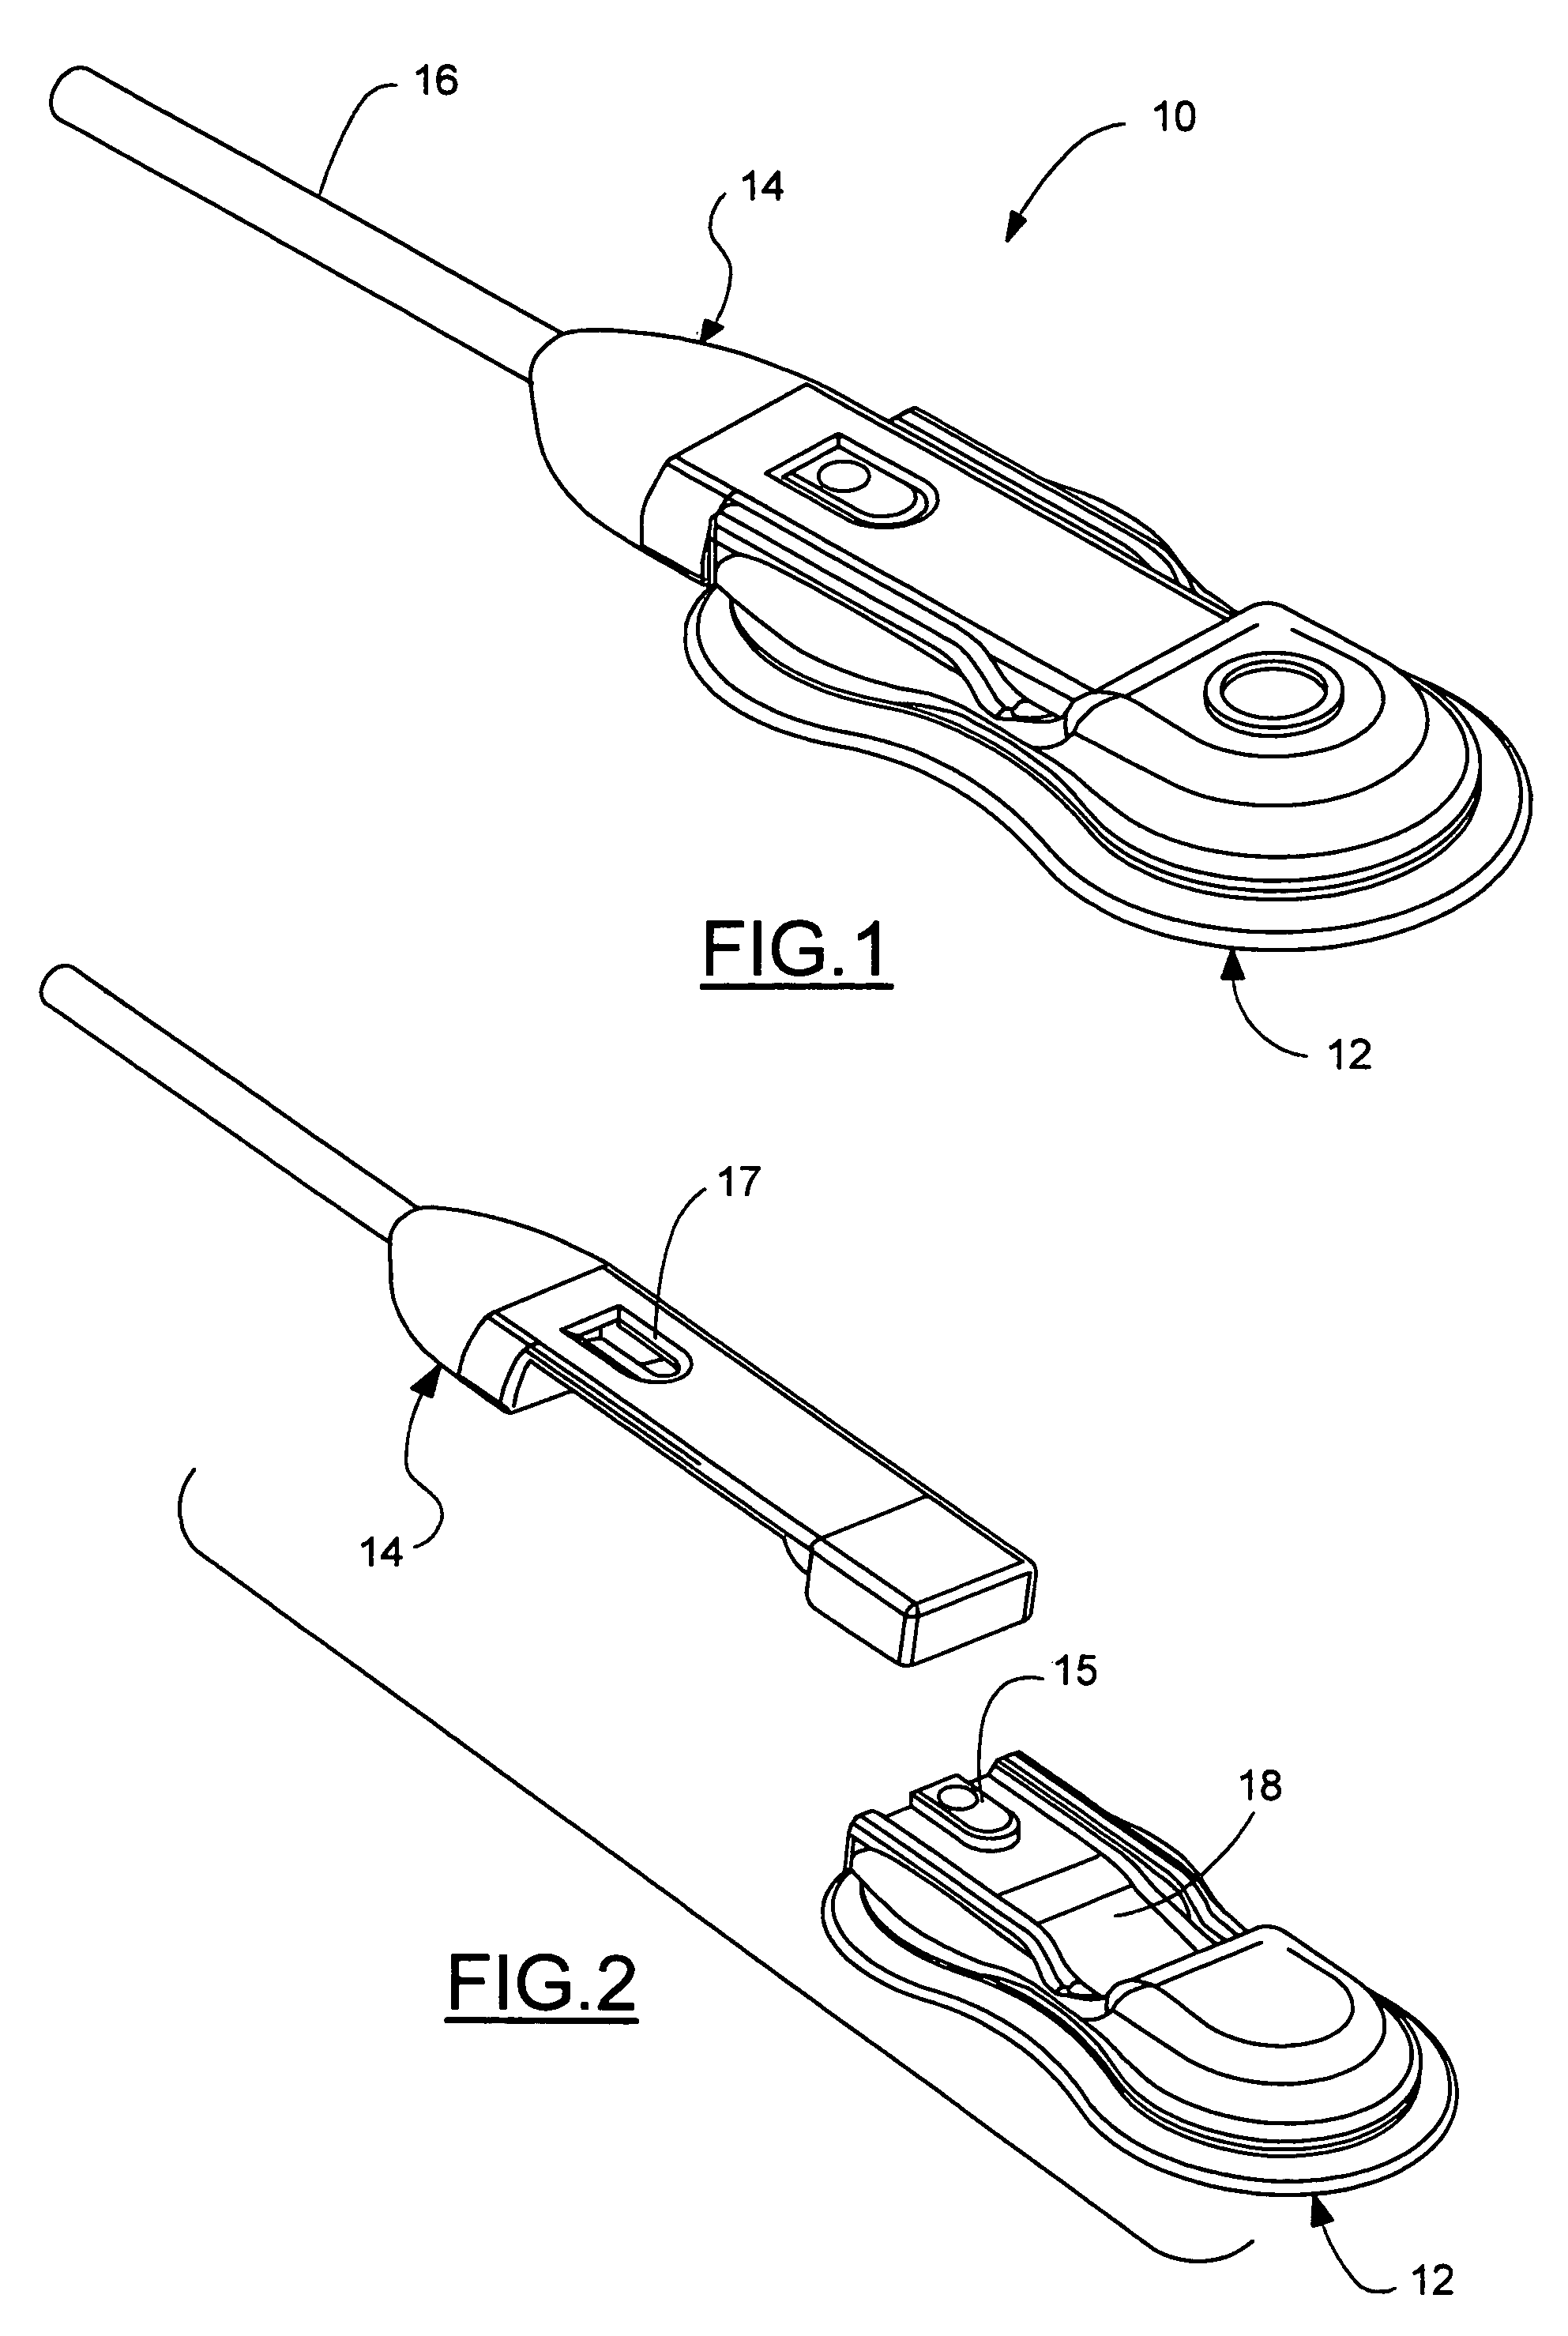 Near infrared spectroscopy device with reusable portion